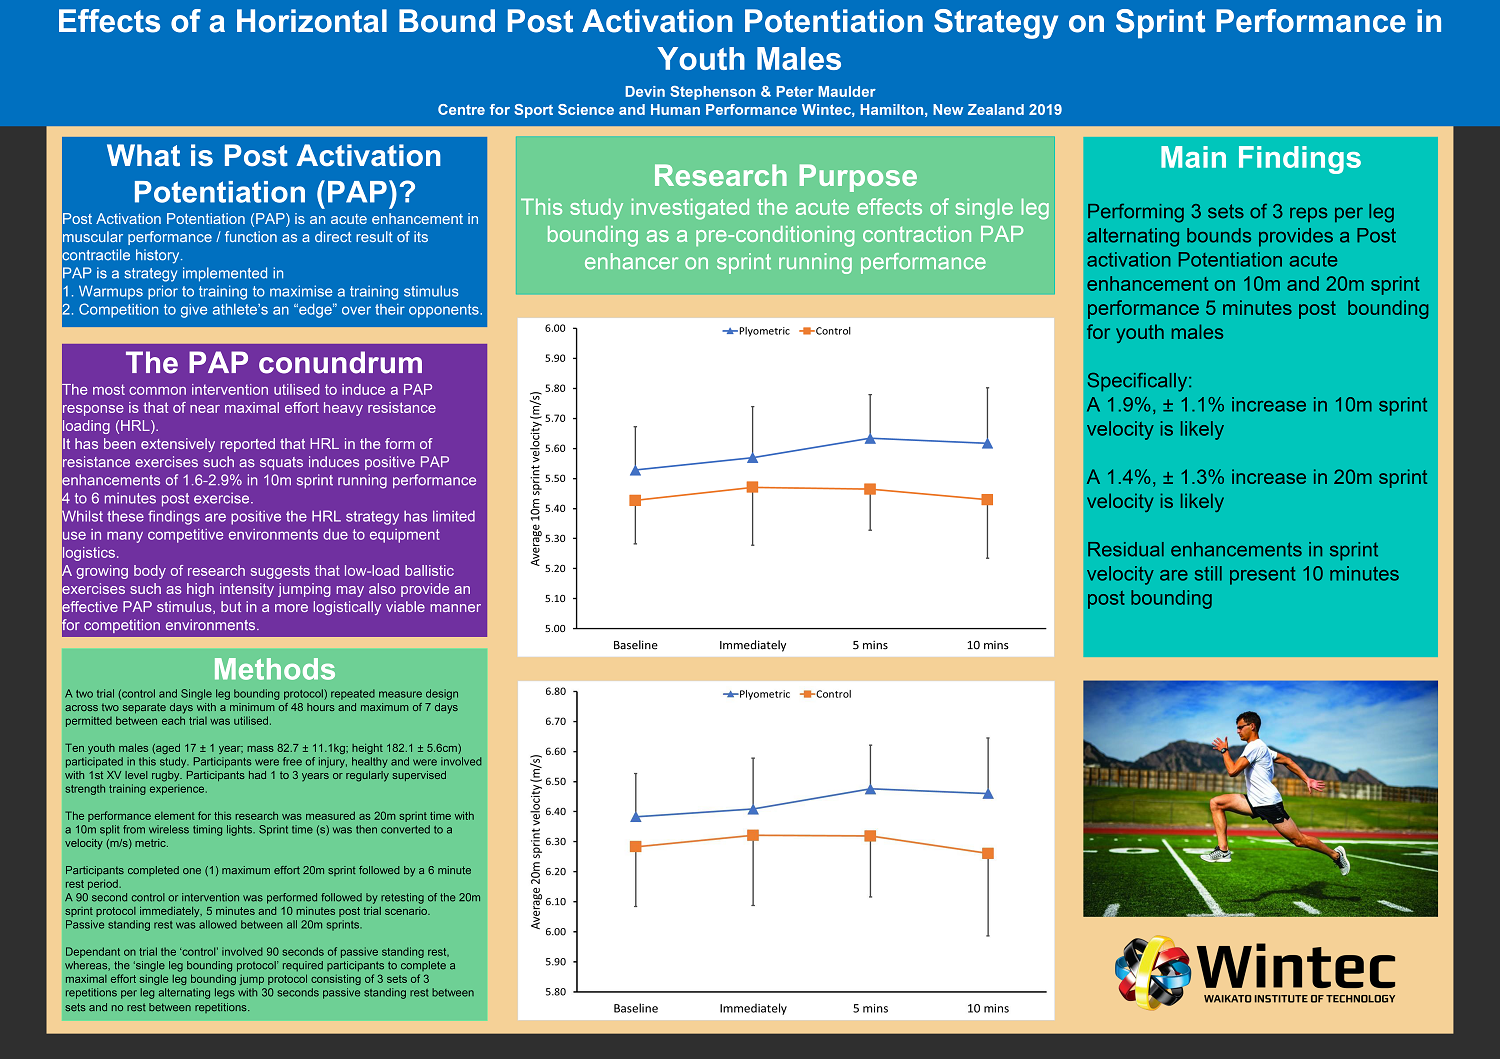 Effects of a Horizontal Bound Post Activation Potentiation Strategy on Sprint Performance in Youth Males